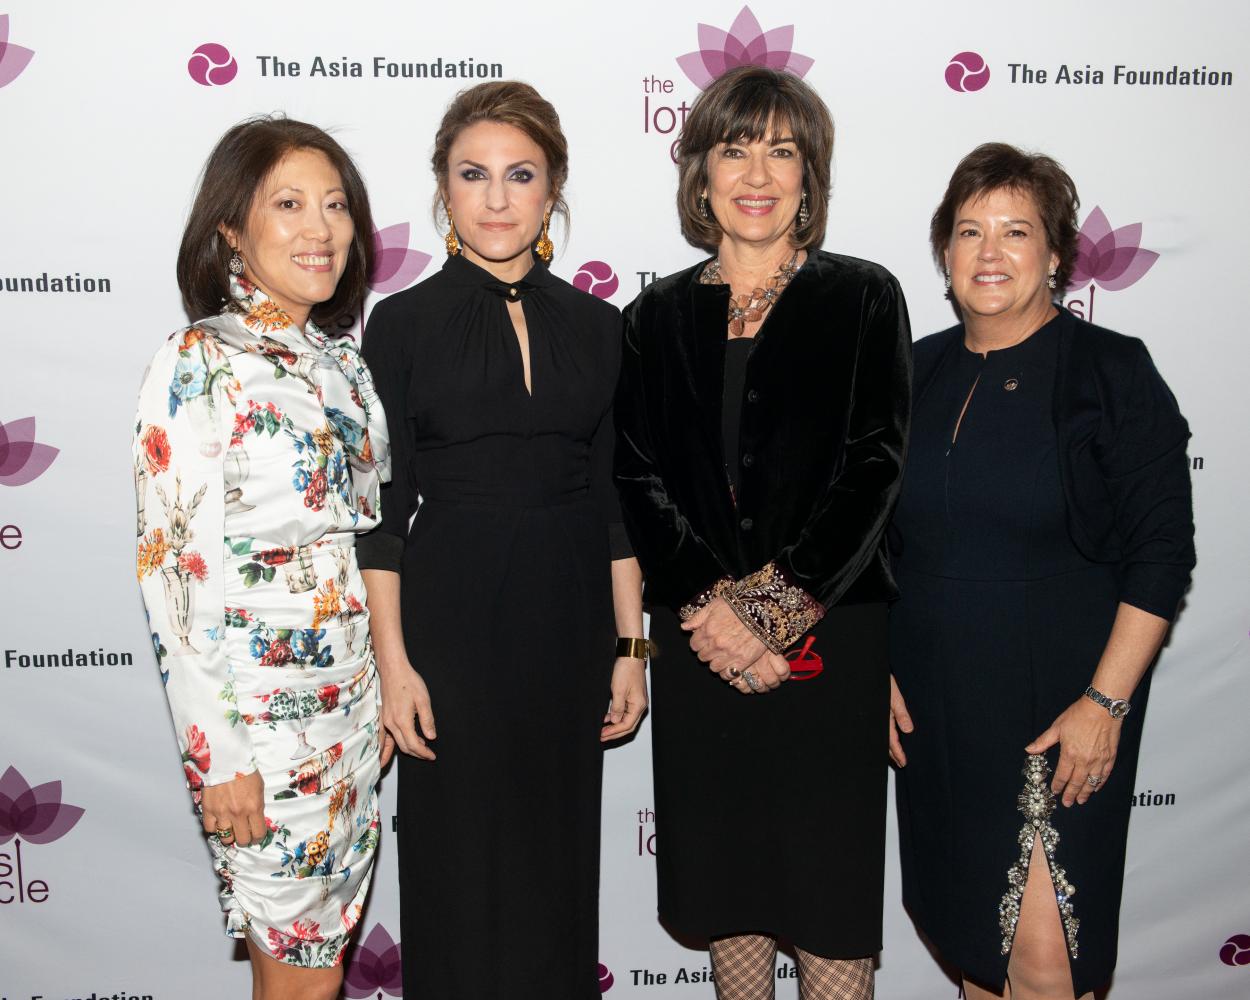 Gala Co-chair Hee-Jung Moon, Gala emcee and New York Times best-selling author Gayle Tzemach Lemmon, Christiane Amanpour, Gala Co-chair Janet Montag smile for a photo